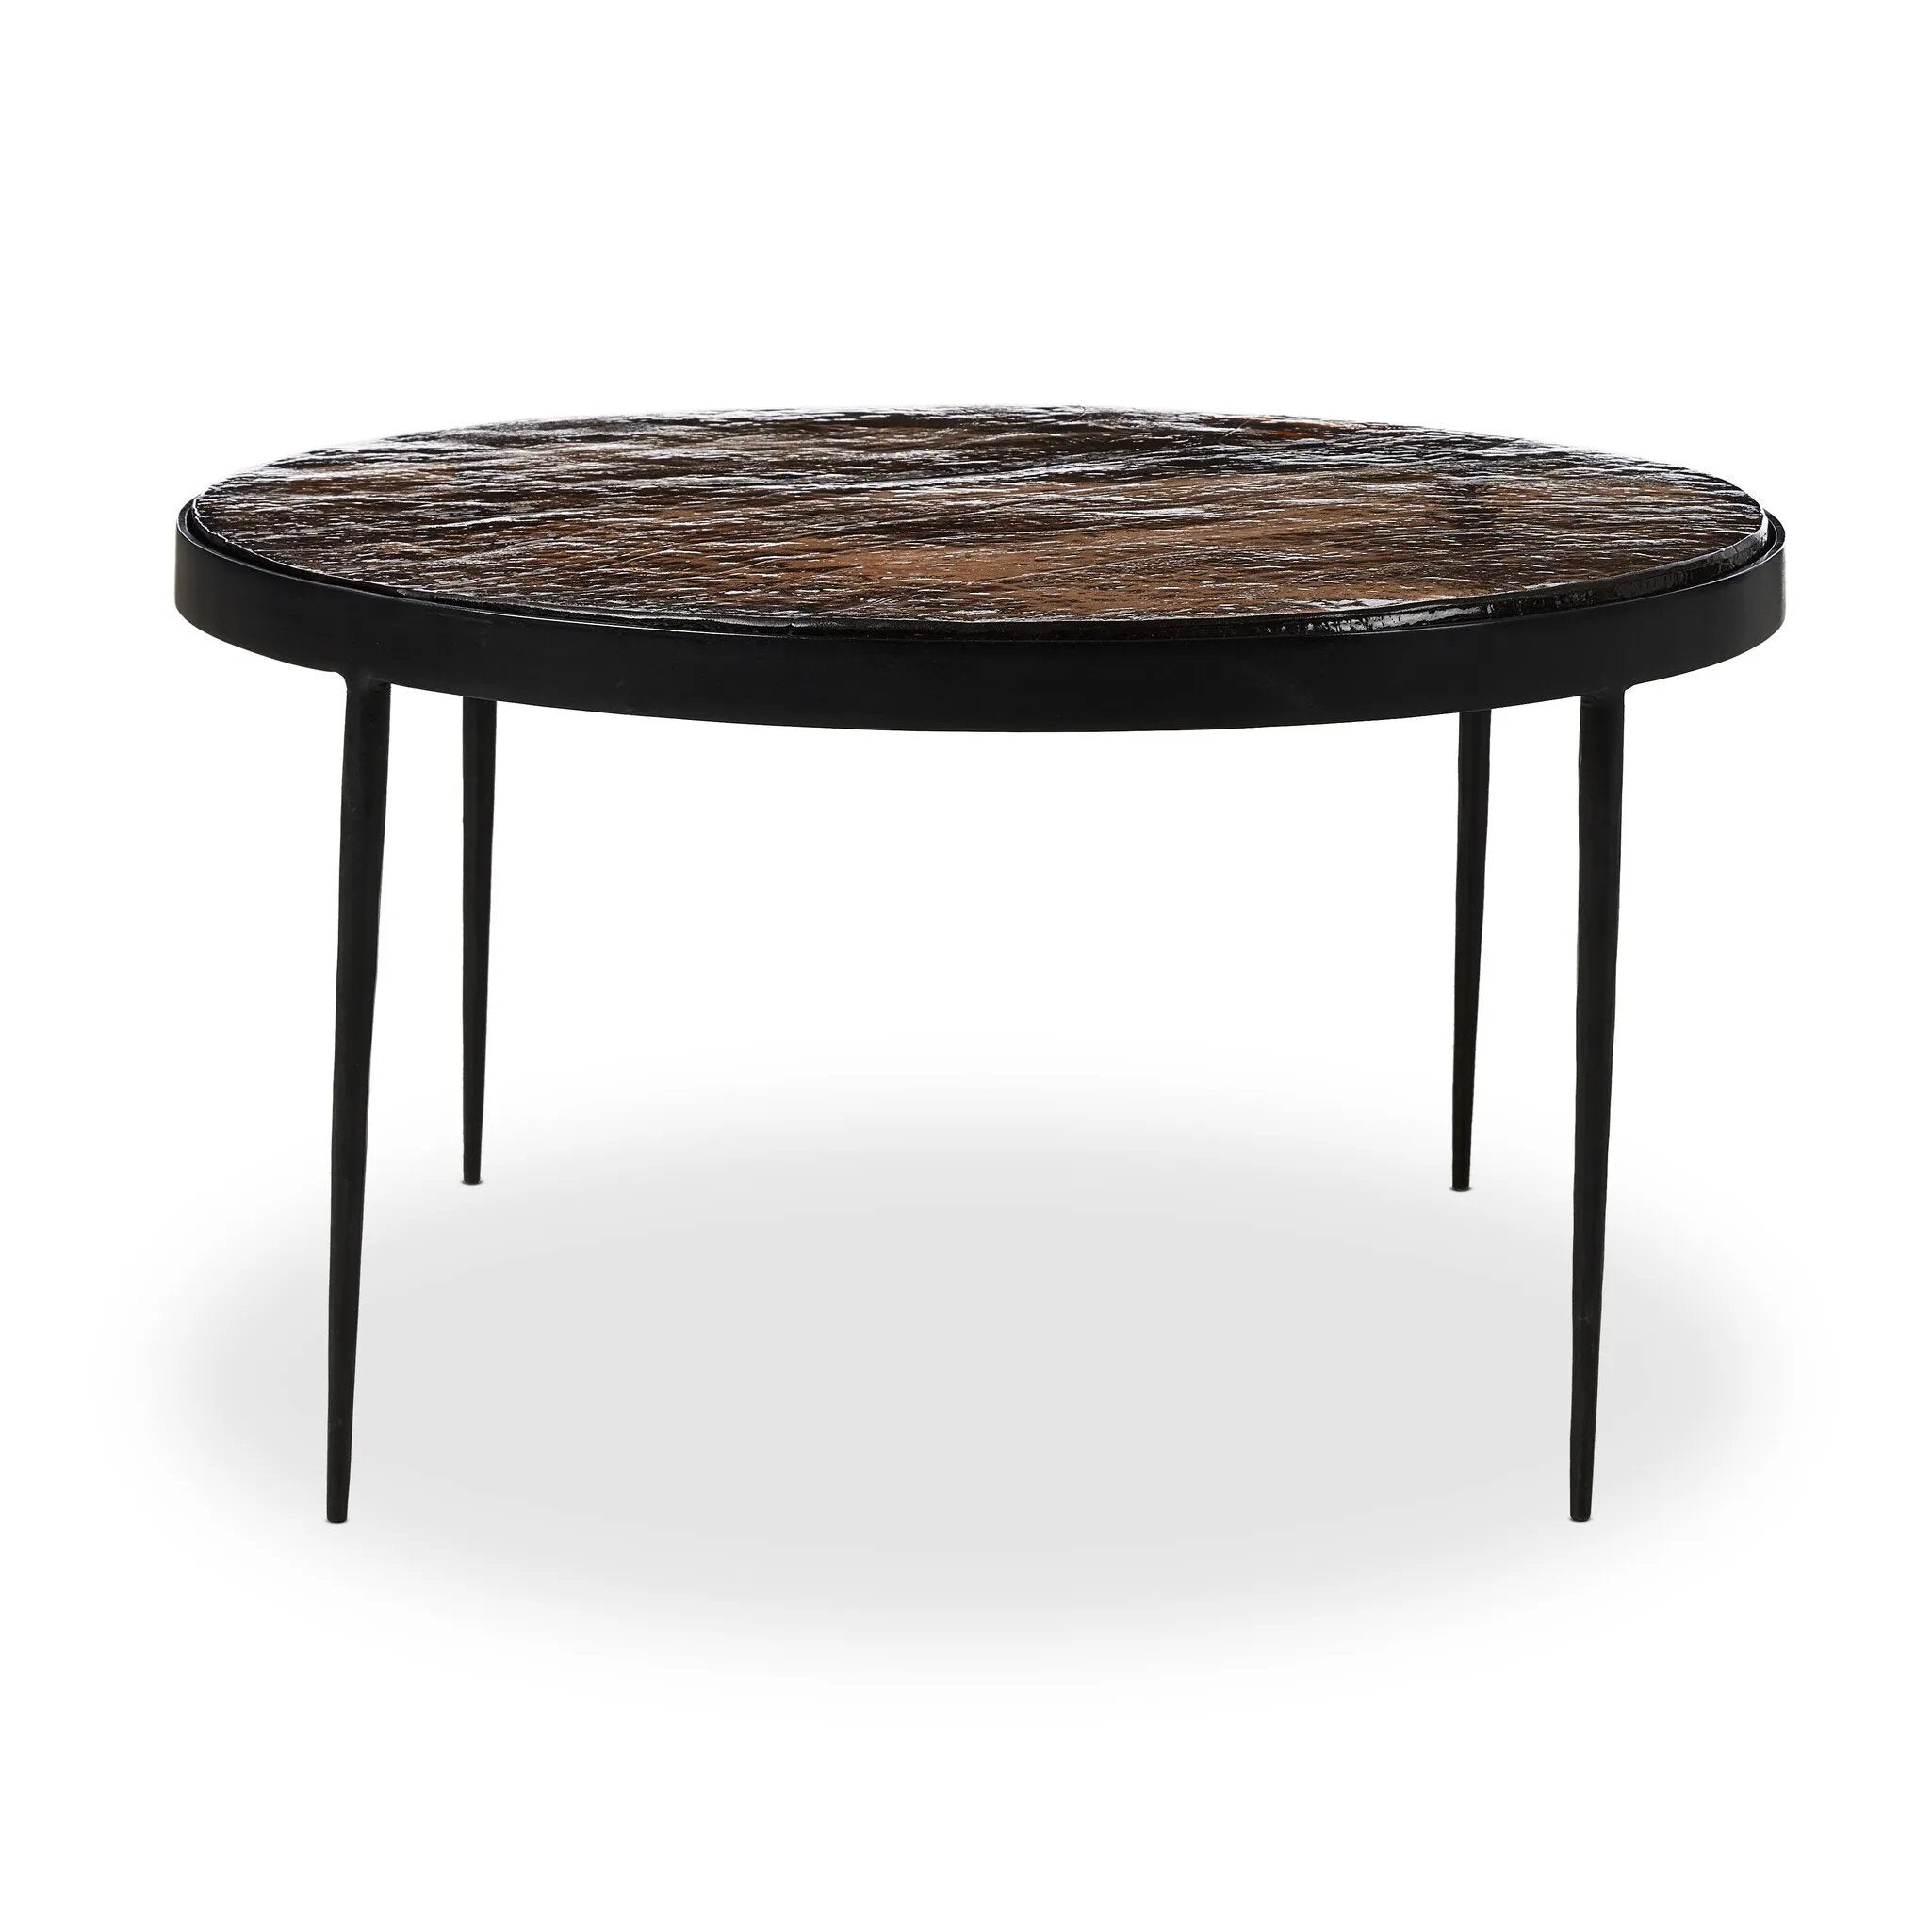 Smoky brown glass-topped table with slim, tapered matte black metal frames for a sleek, modern look. Part of a nesting set, can be used alone or paired with its smaller counterpart.Collection: Marlo Amethyst Home provides interior design, new home construction design consulting, vintage area rugs, and lighting in the Washington metro area.